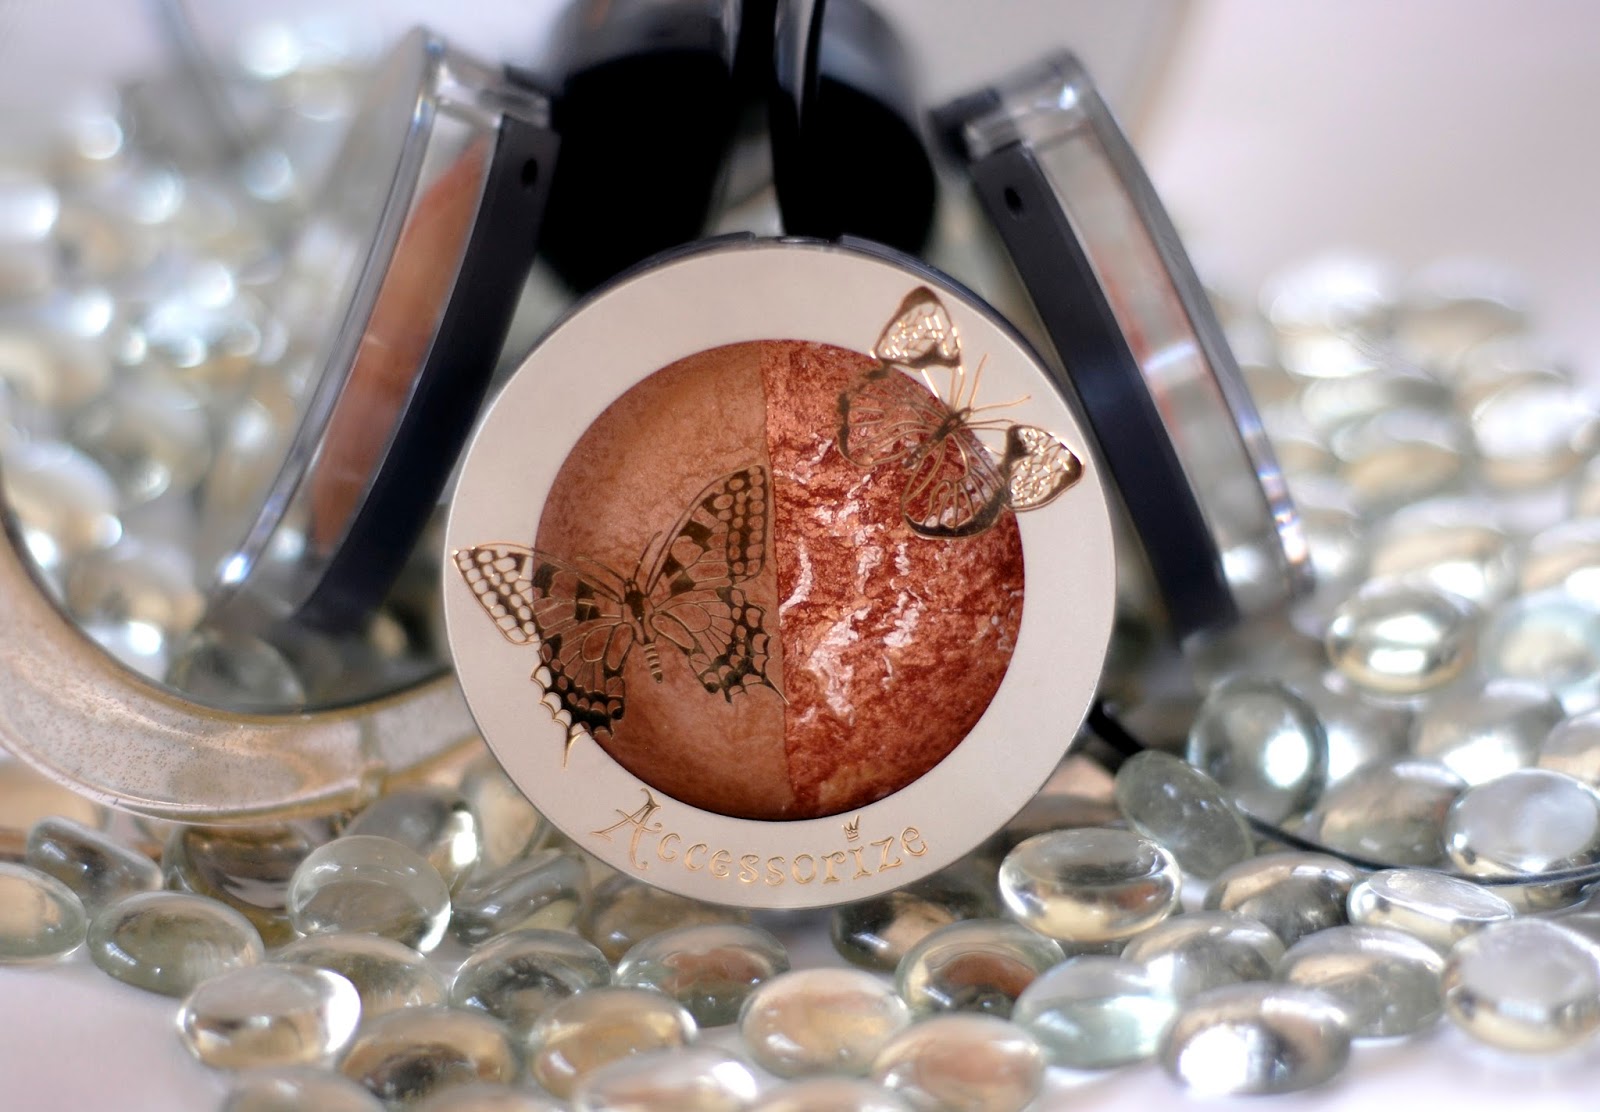 Accessorize Baked Bronzer Duo in Bali